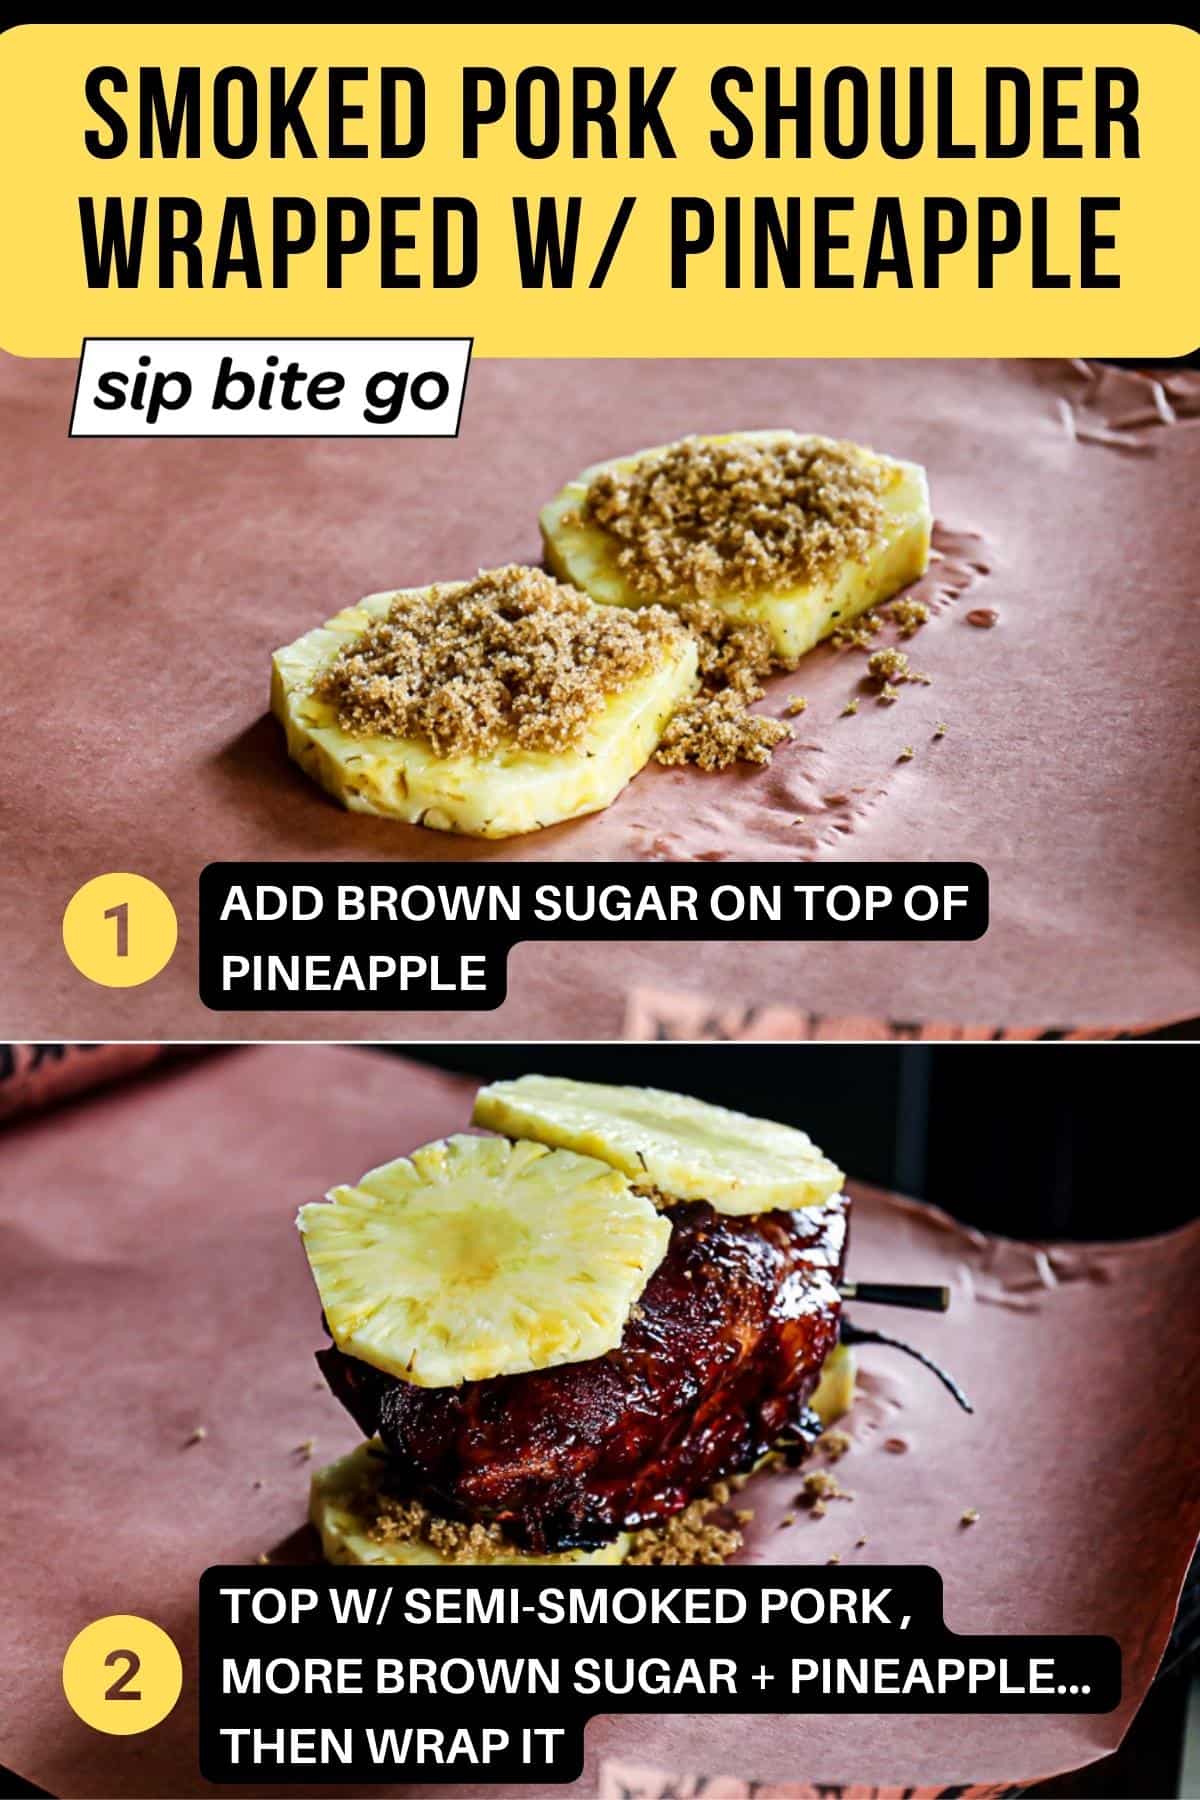 Infographic with steps for wrapping bone in smoked pork shoulder with pineapple